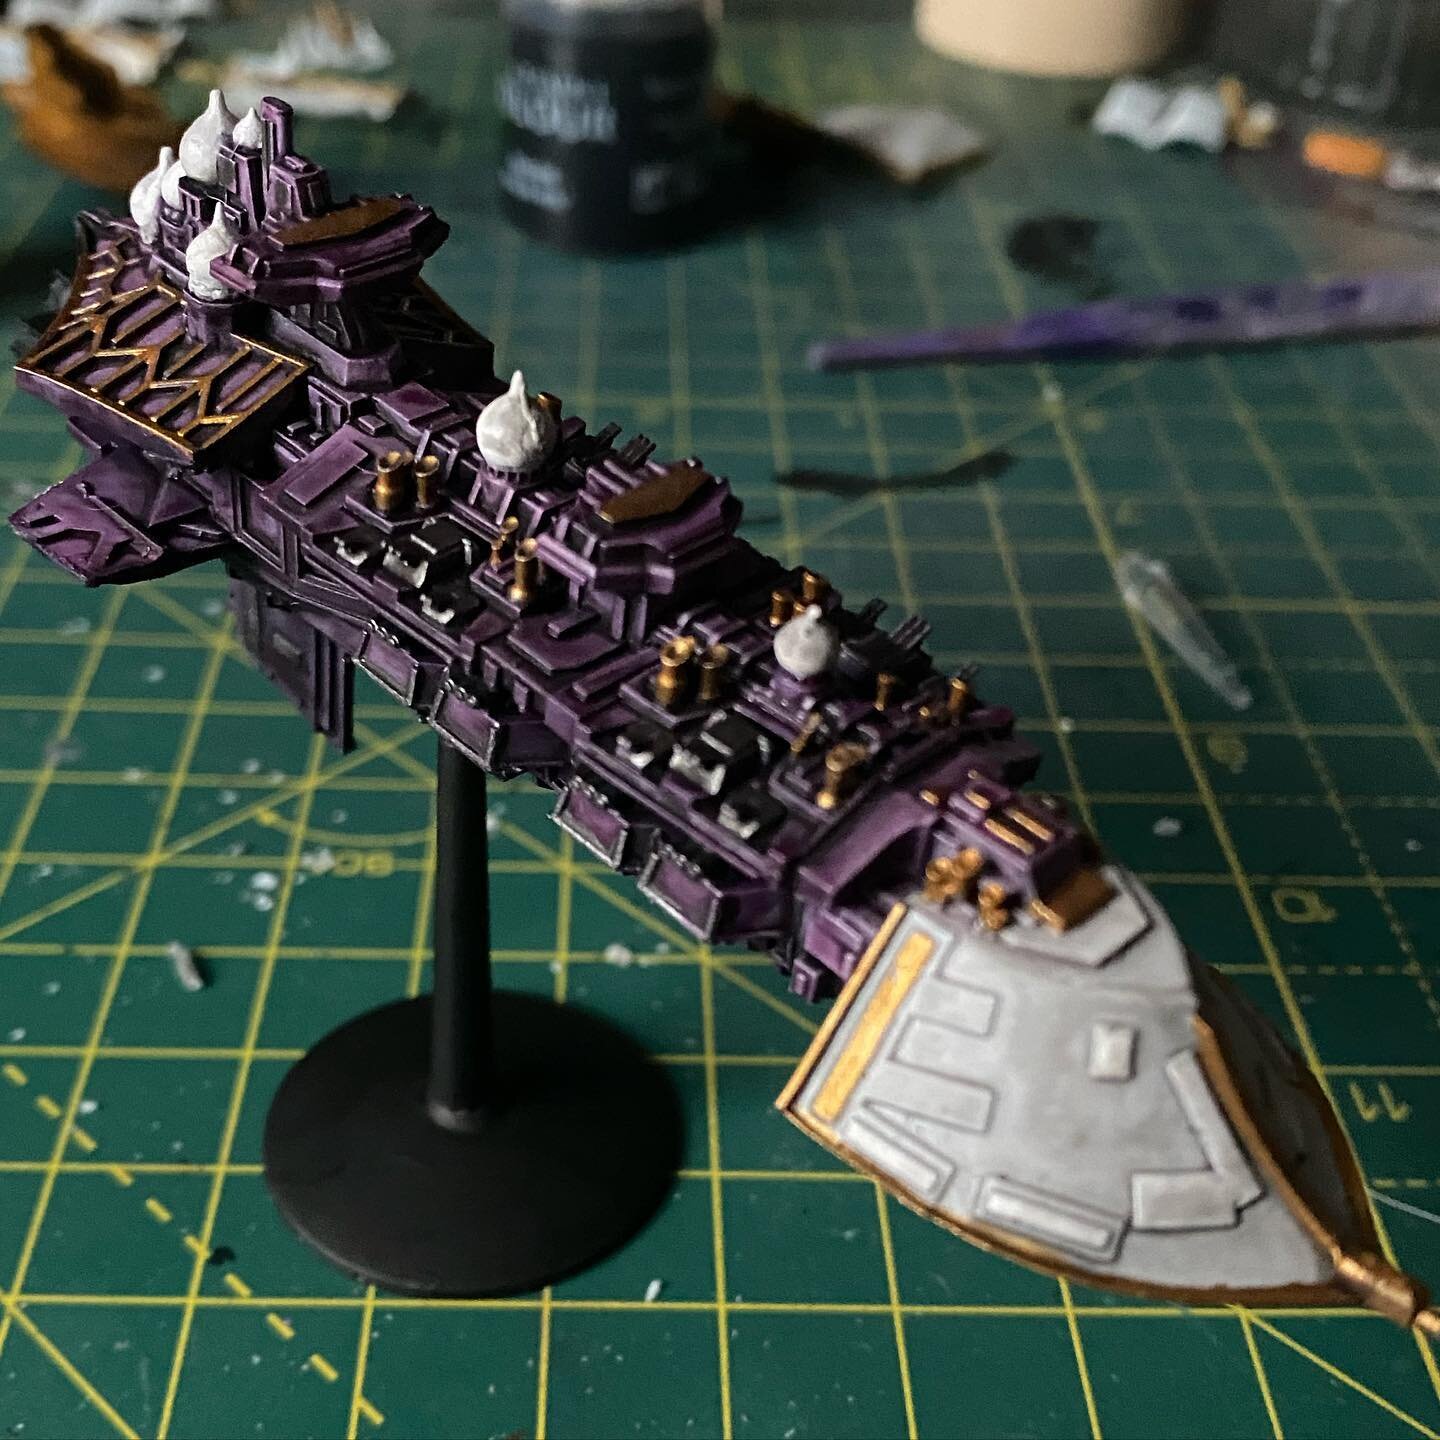 &hellip;.and I&rsquo;ve painted too! 3D printed grand cruiser to replace my old #kitbash one as seen recently in the battle report by @bearfoot_miniatures - next round coming next week with this bad boy on the table!

#bfg #battlefleetgothic #battlef